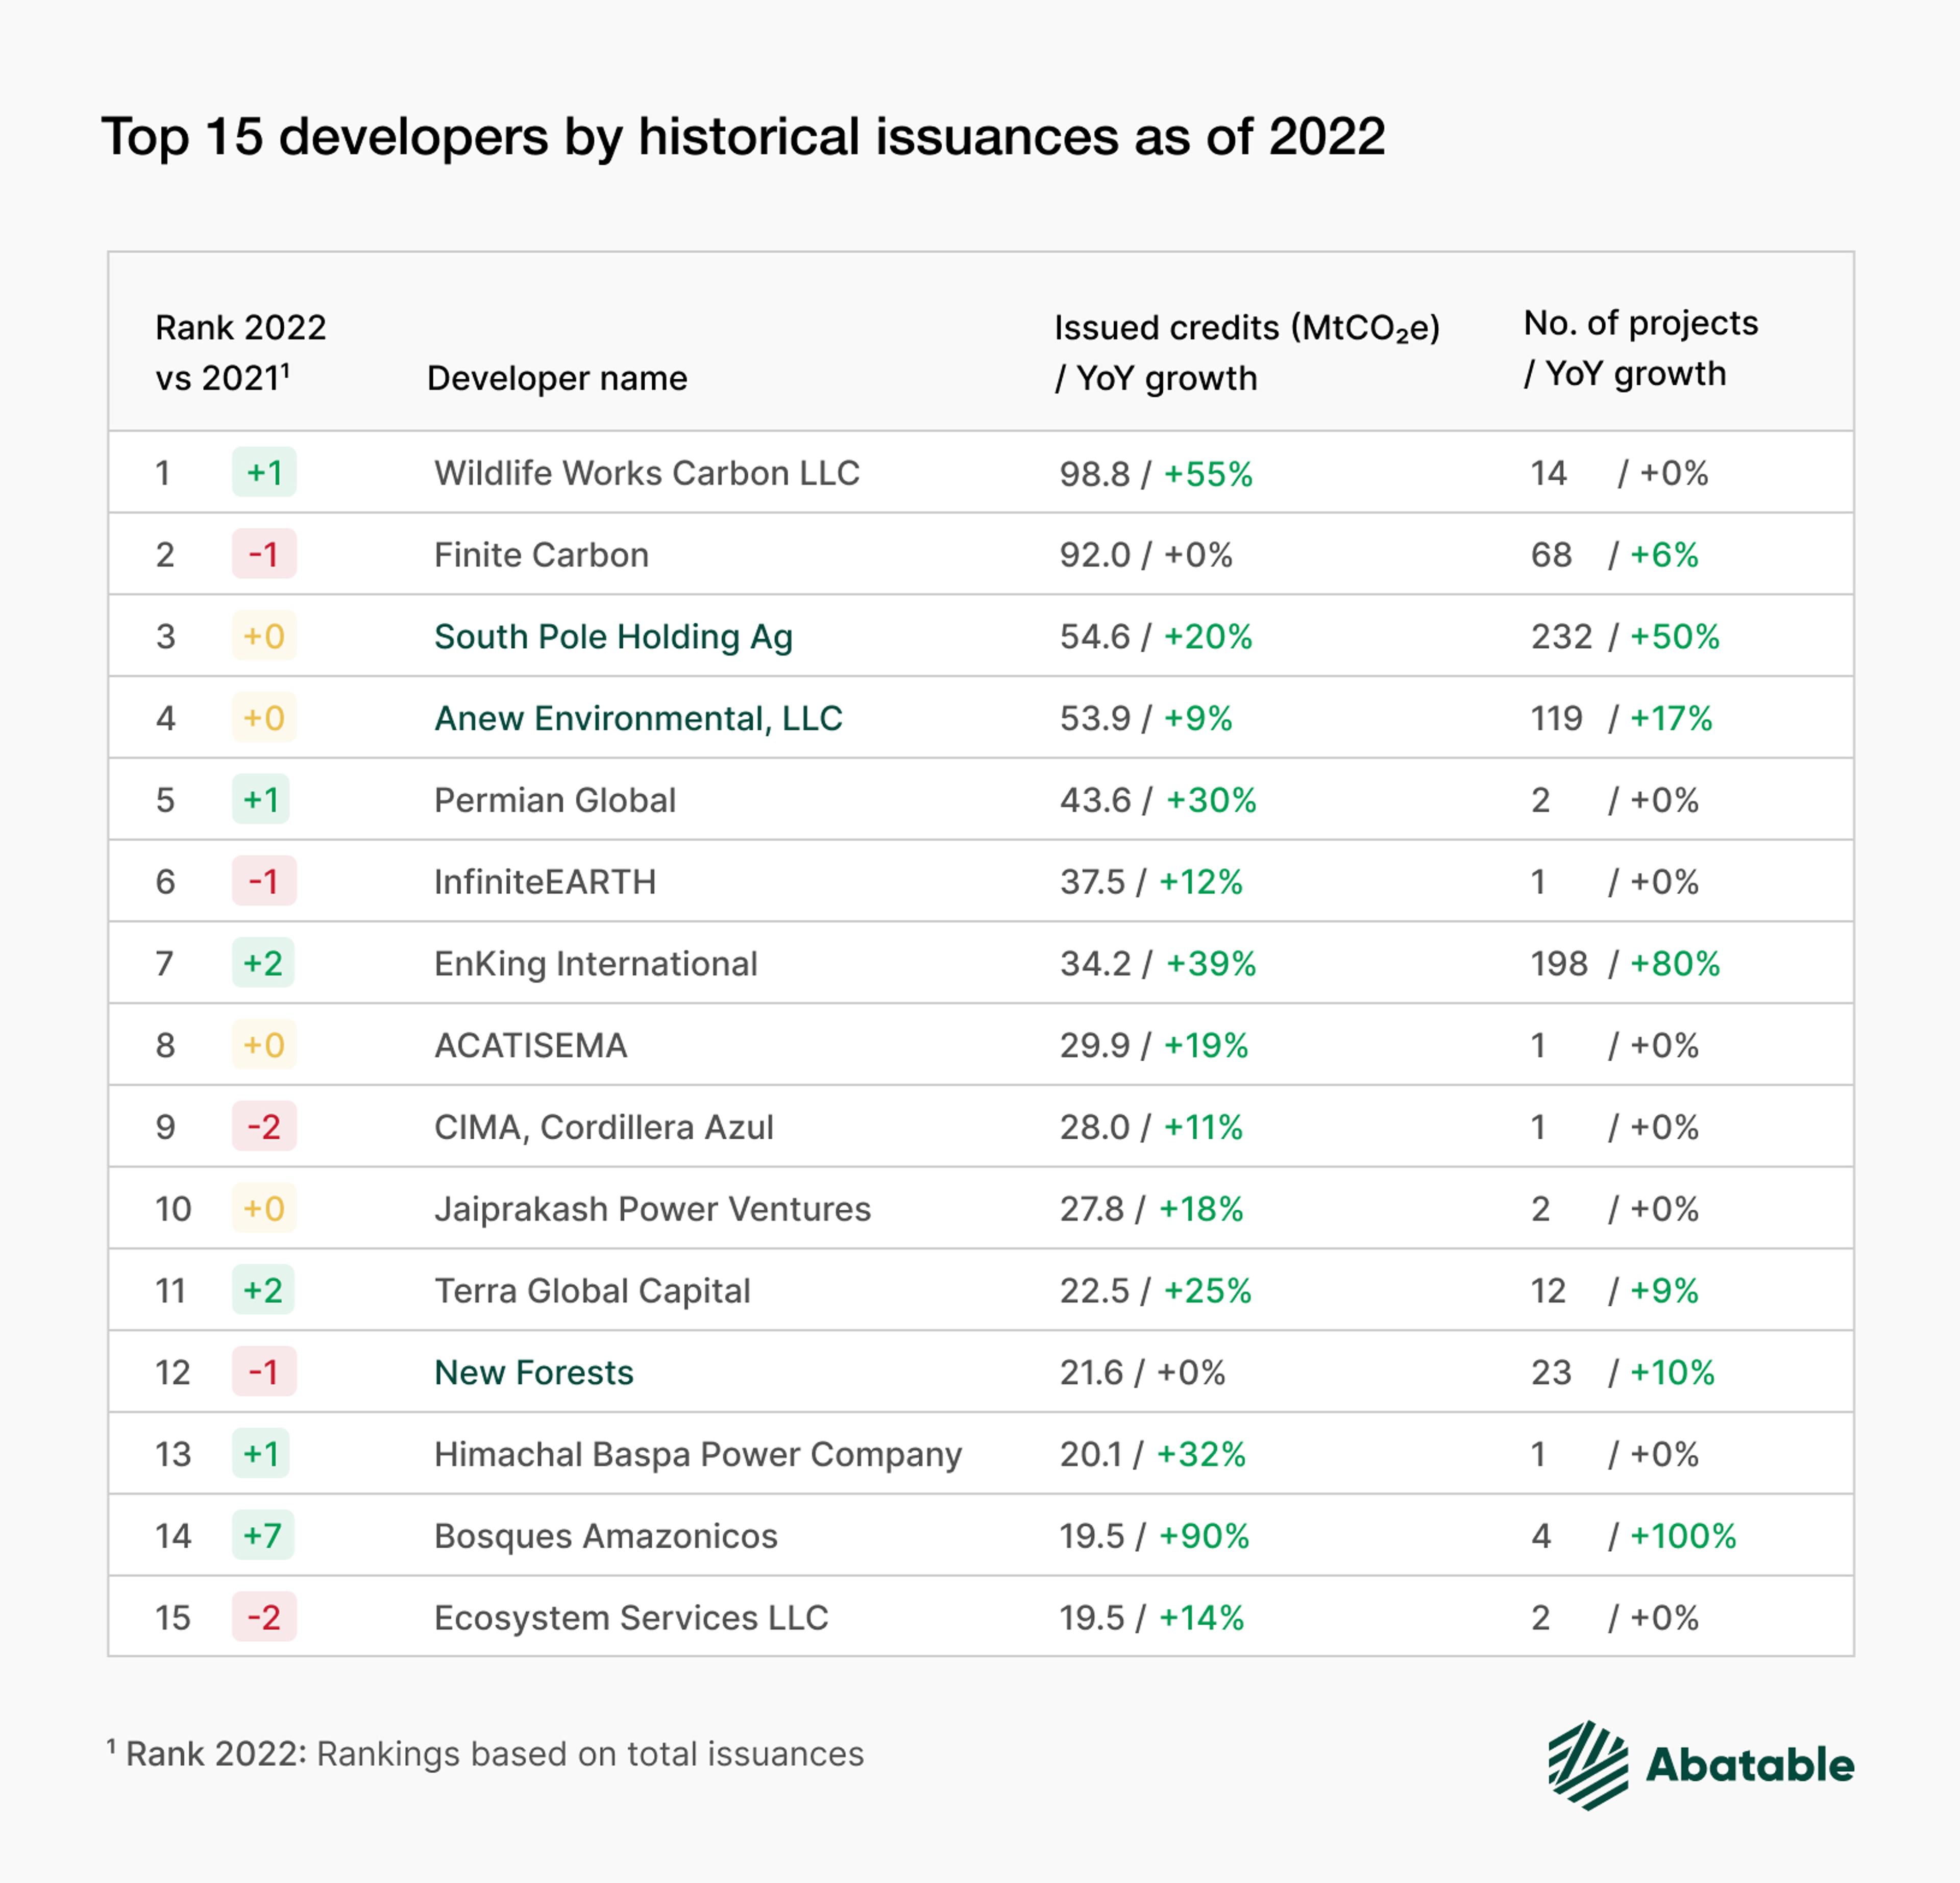 Top 15 carbon project developers by historical issuances as of 2022